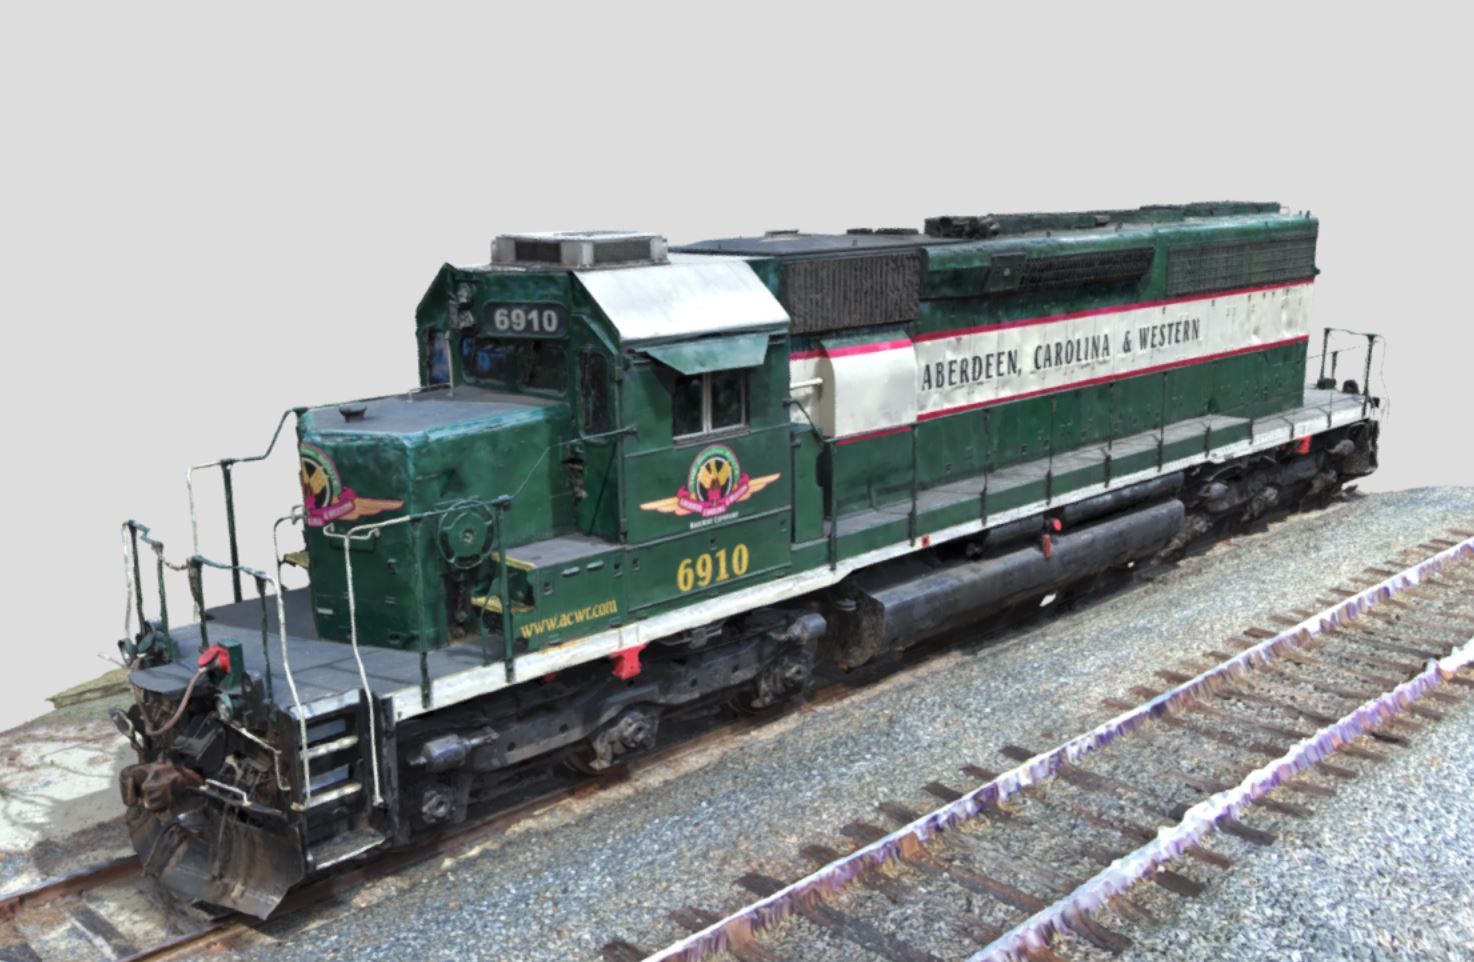 Aberdeen-Carolina-and-Western-Railway-Train-Engine, Train-Engine, Skydio, 3D-Scan, Drones, Inspection-Scan, Inspection 